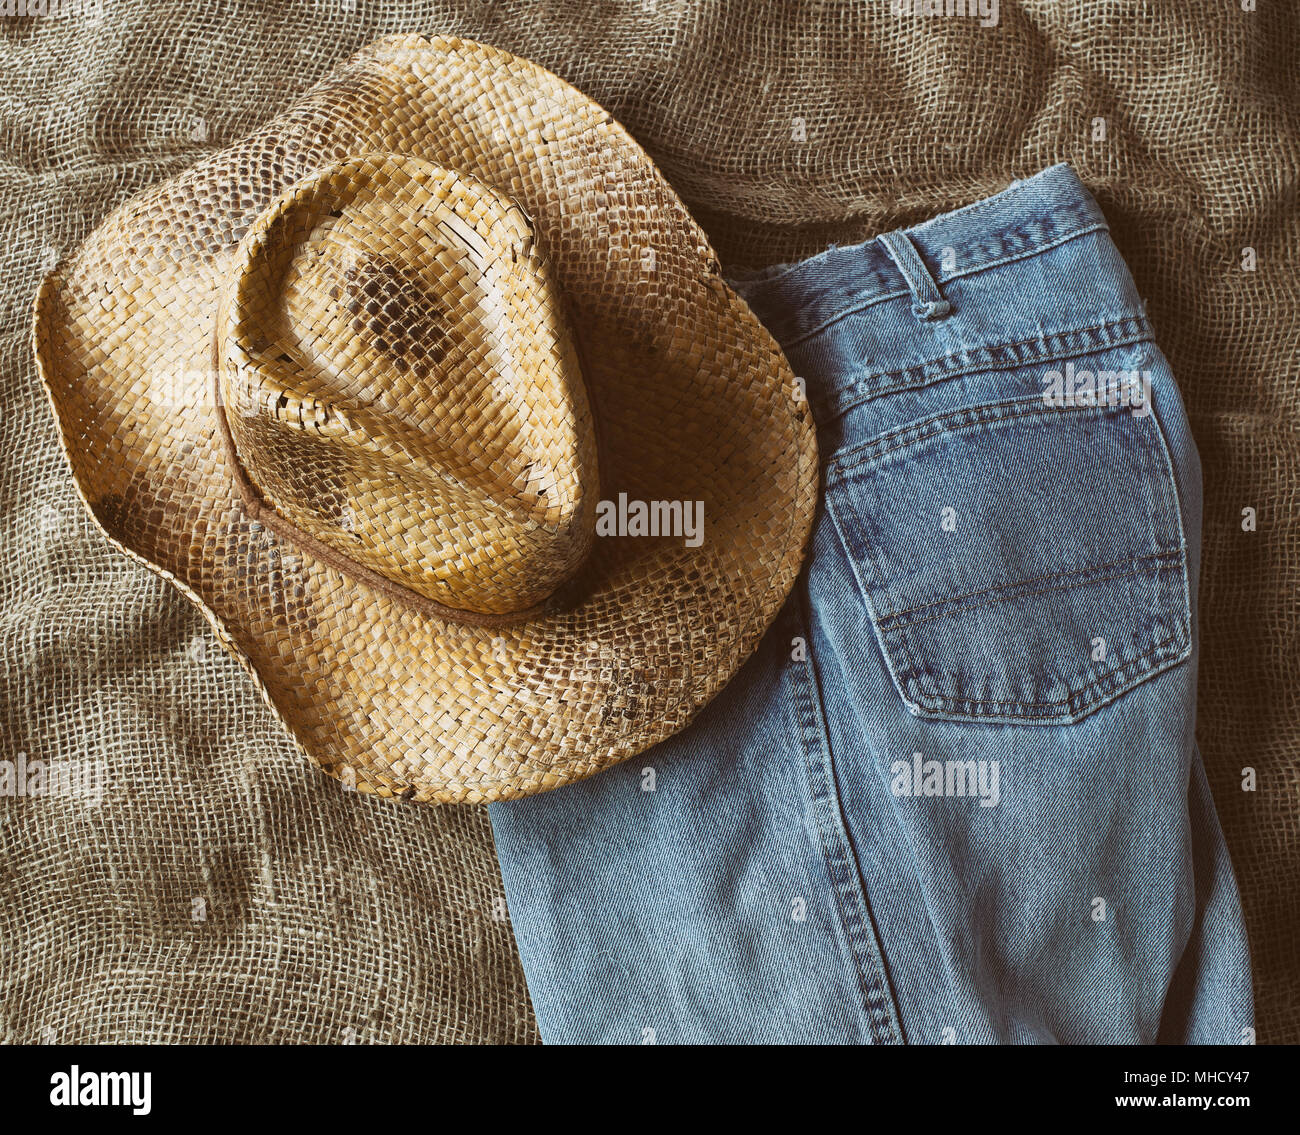 Straw hat and faded blue jeans on burlap. Top down view. Stock Photo